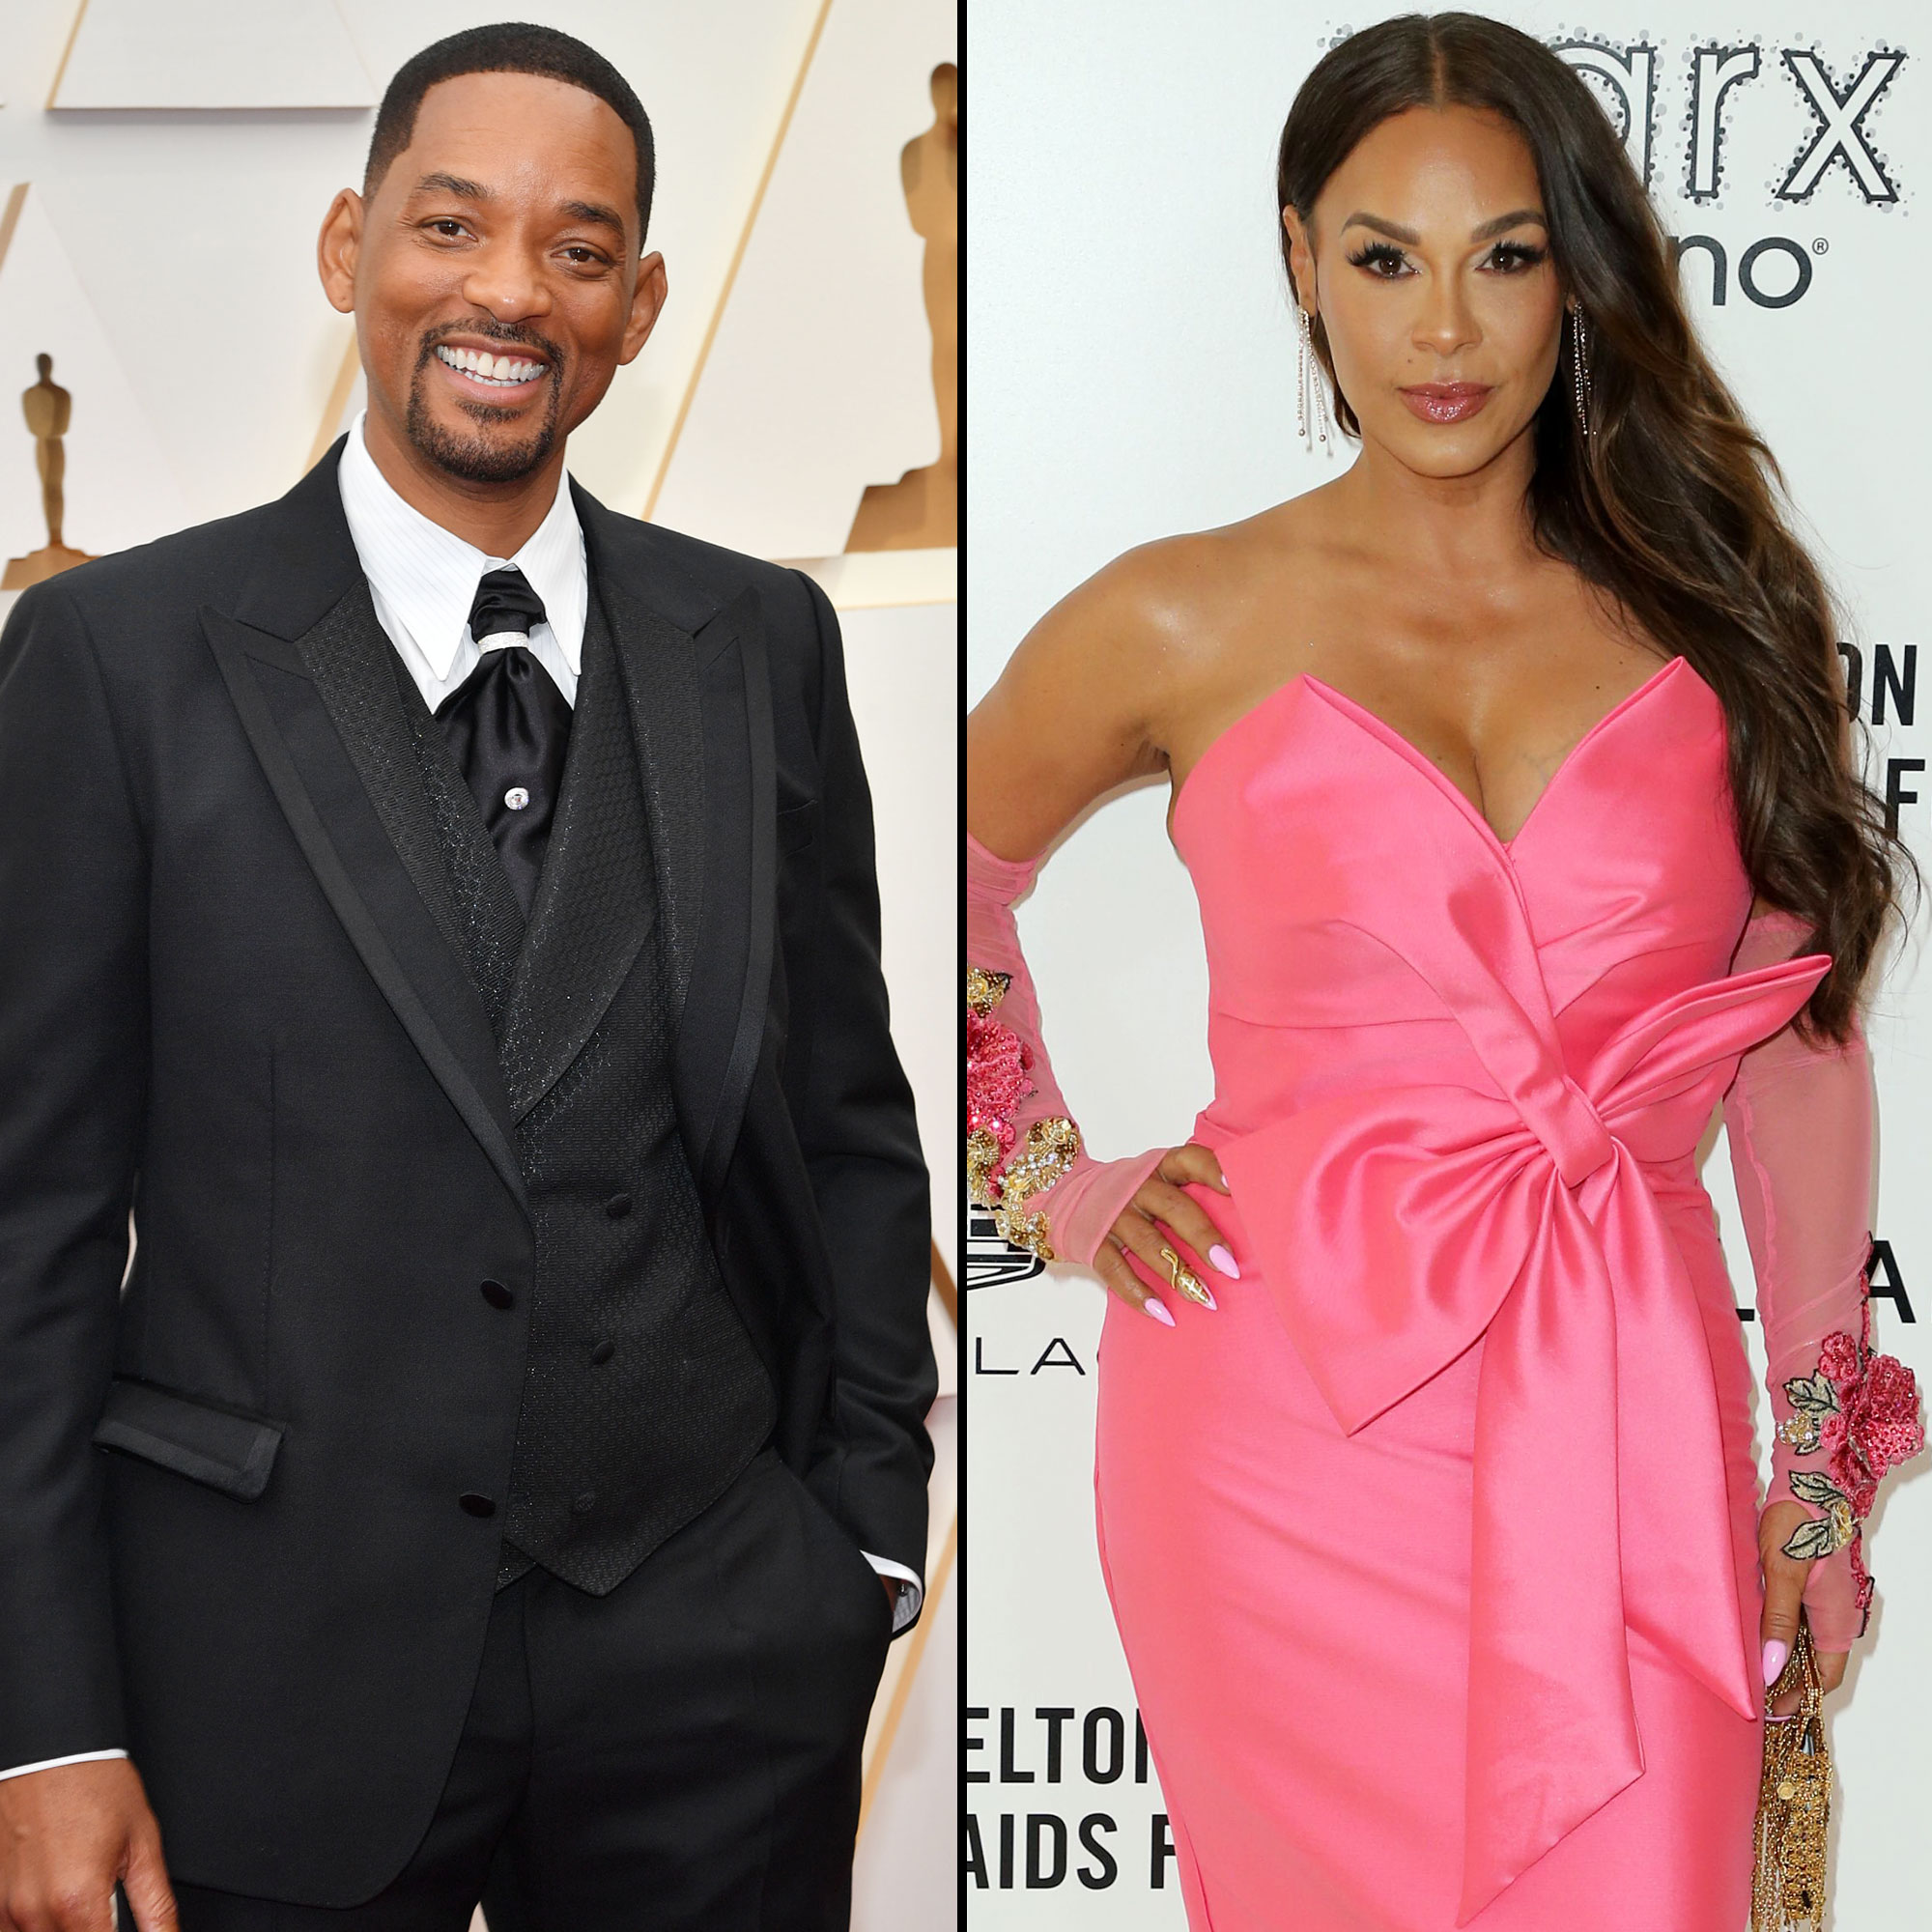 Will Smith Reunites With Ex-Wife Sheree Zampino After Oscars 2022